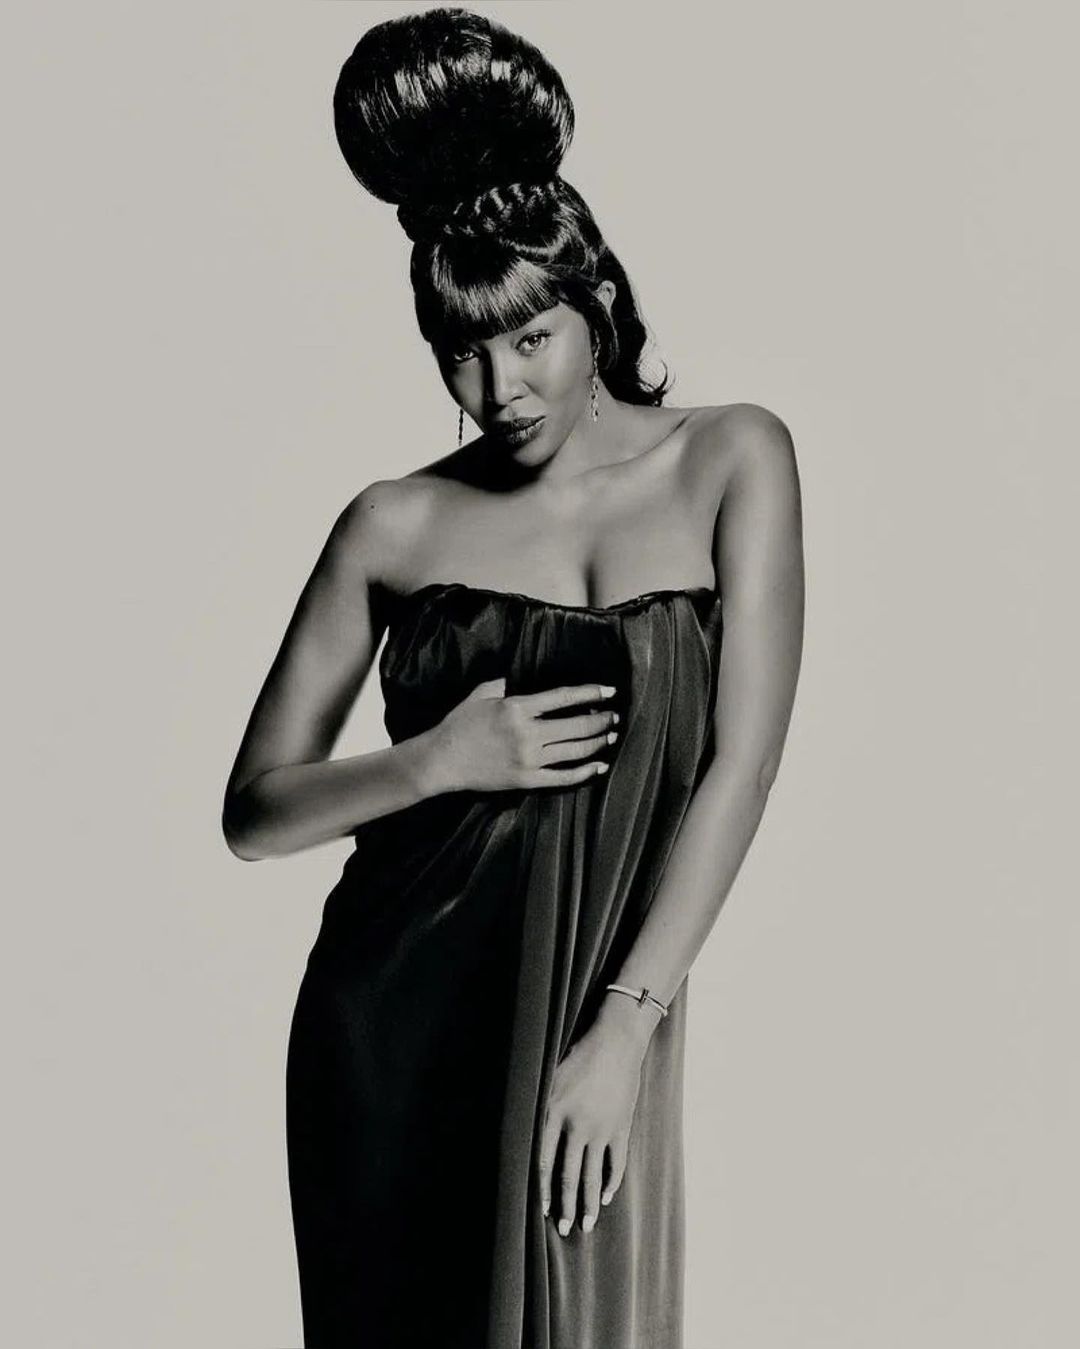 This is yet another incredible photograph of Naomi Campbell. This was a shoot for W Magazine Volume 1, 2022